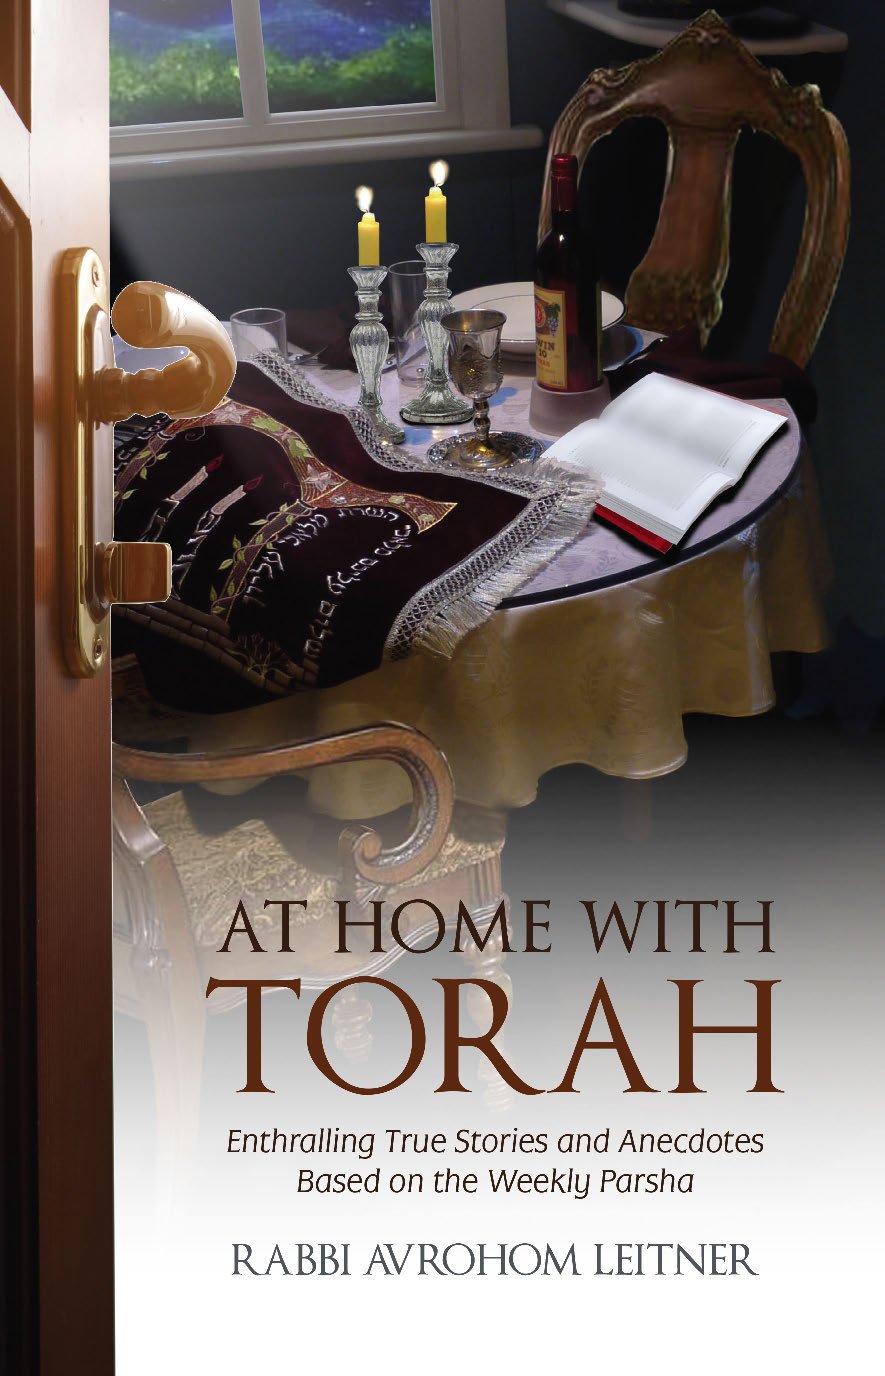 At home with Torah: entralling true stories and anecdotes based on the weekly parsha